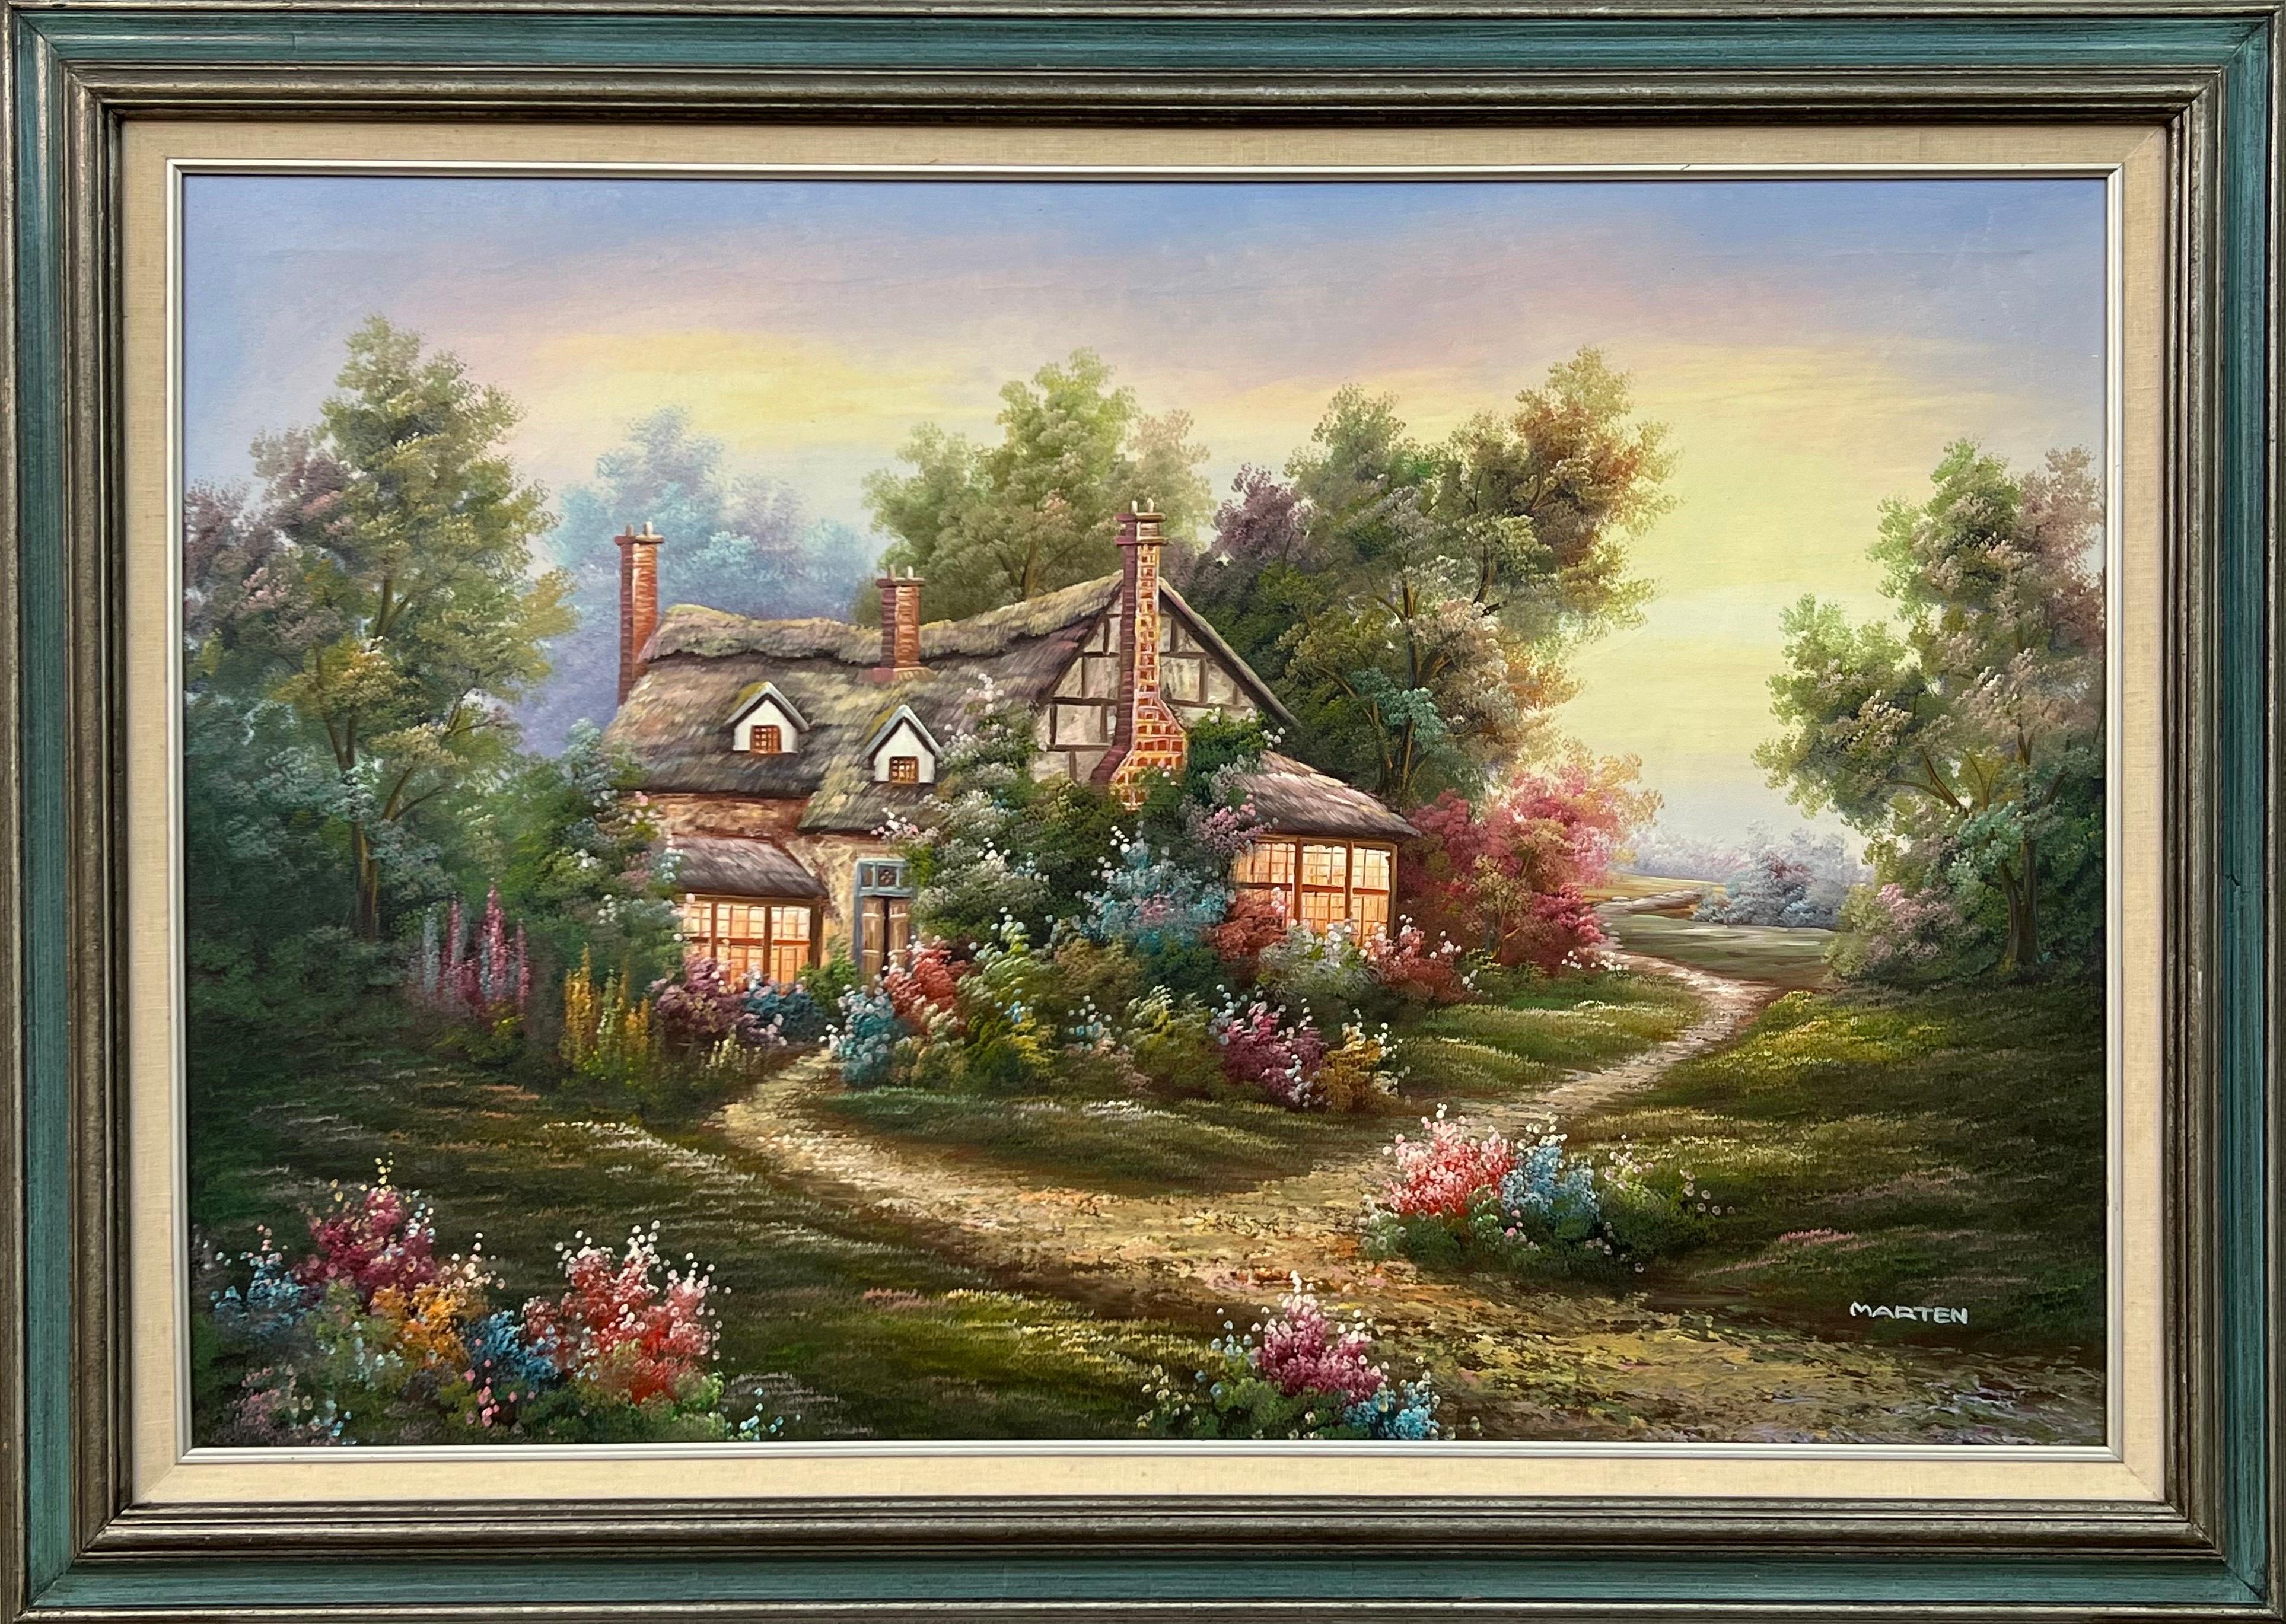 Marten Landscape Painting - Vintage Oil Painting of Fantasy Cottage in the Woods with Flowers & Gardens